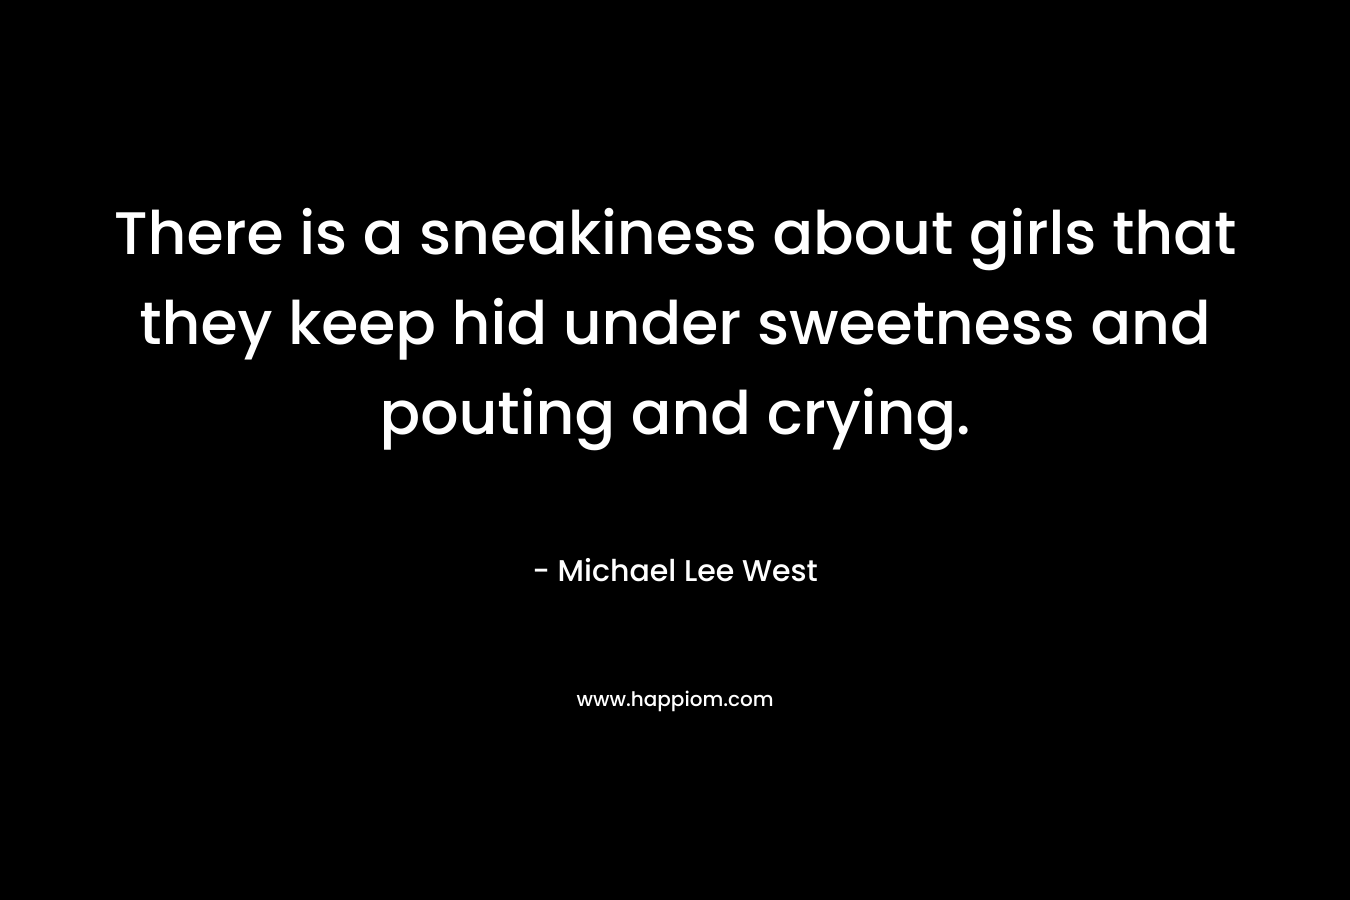 There is a sneakiness about girls that they keep hid under sweetness and pouting and crying.